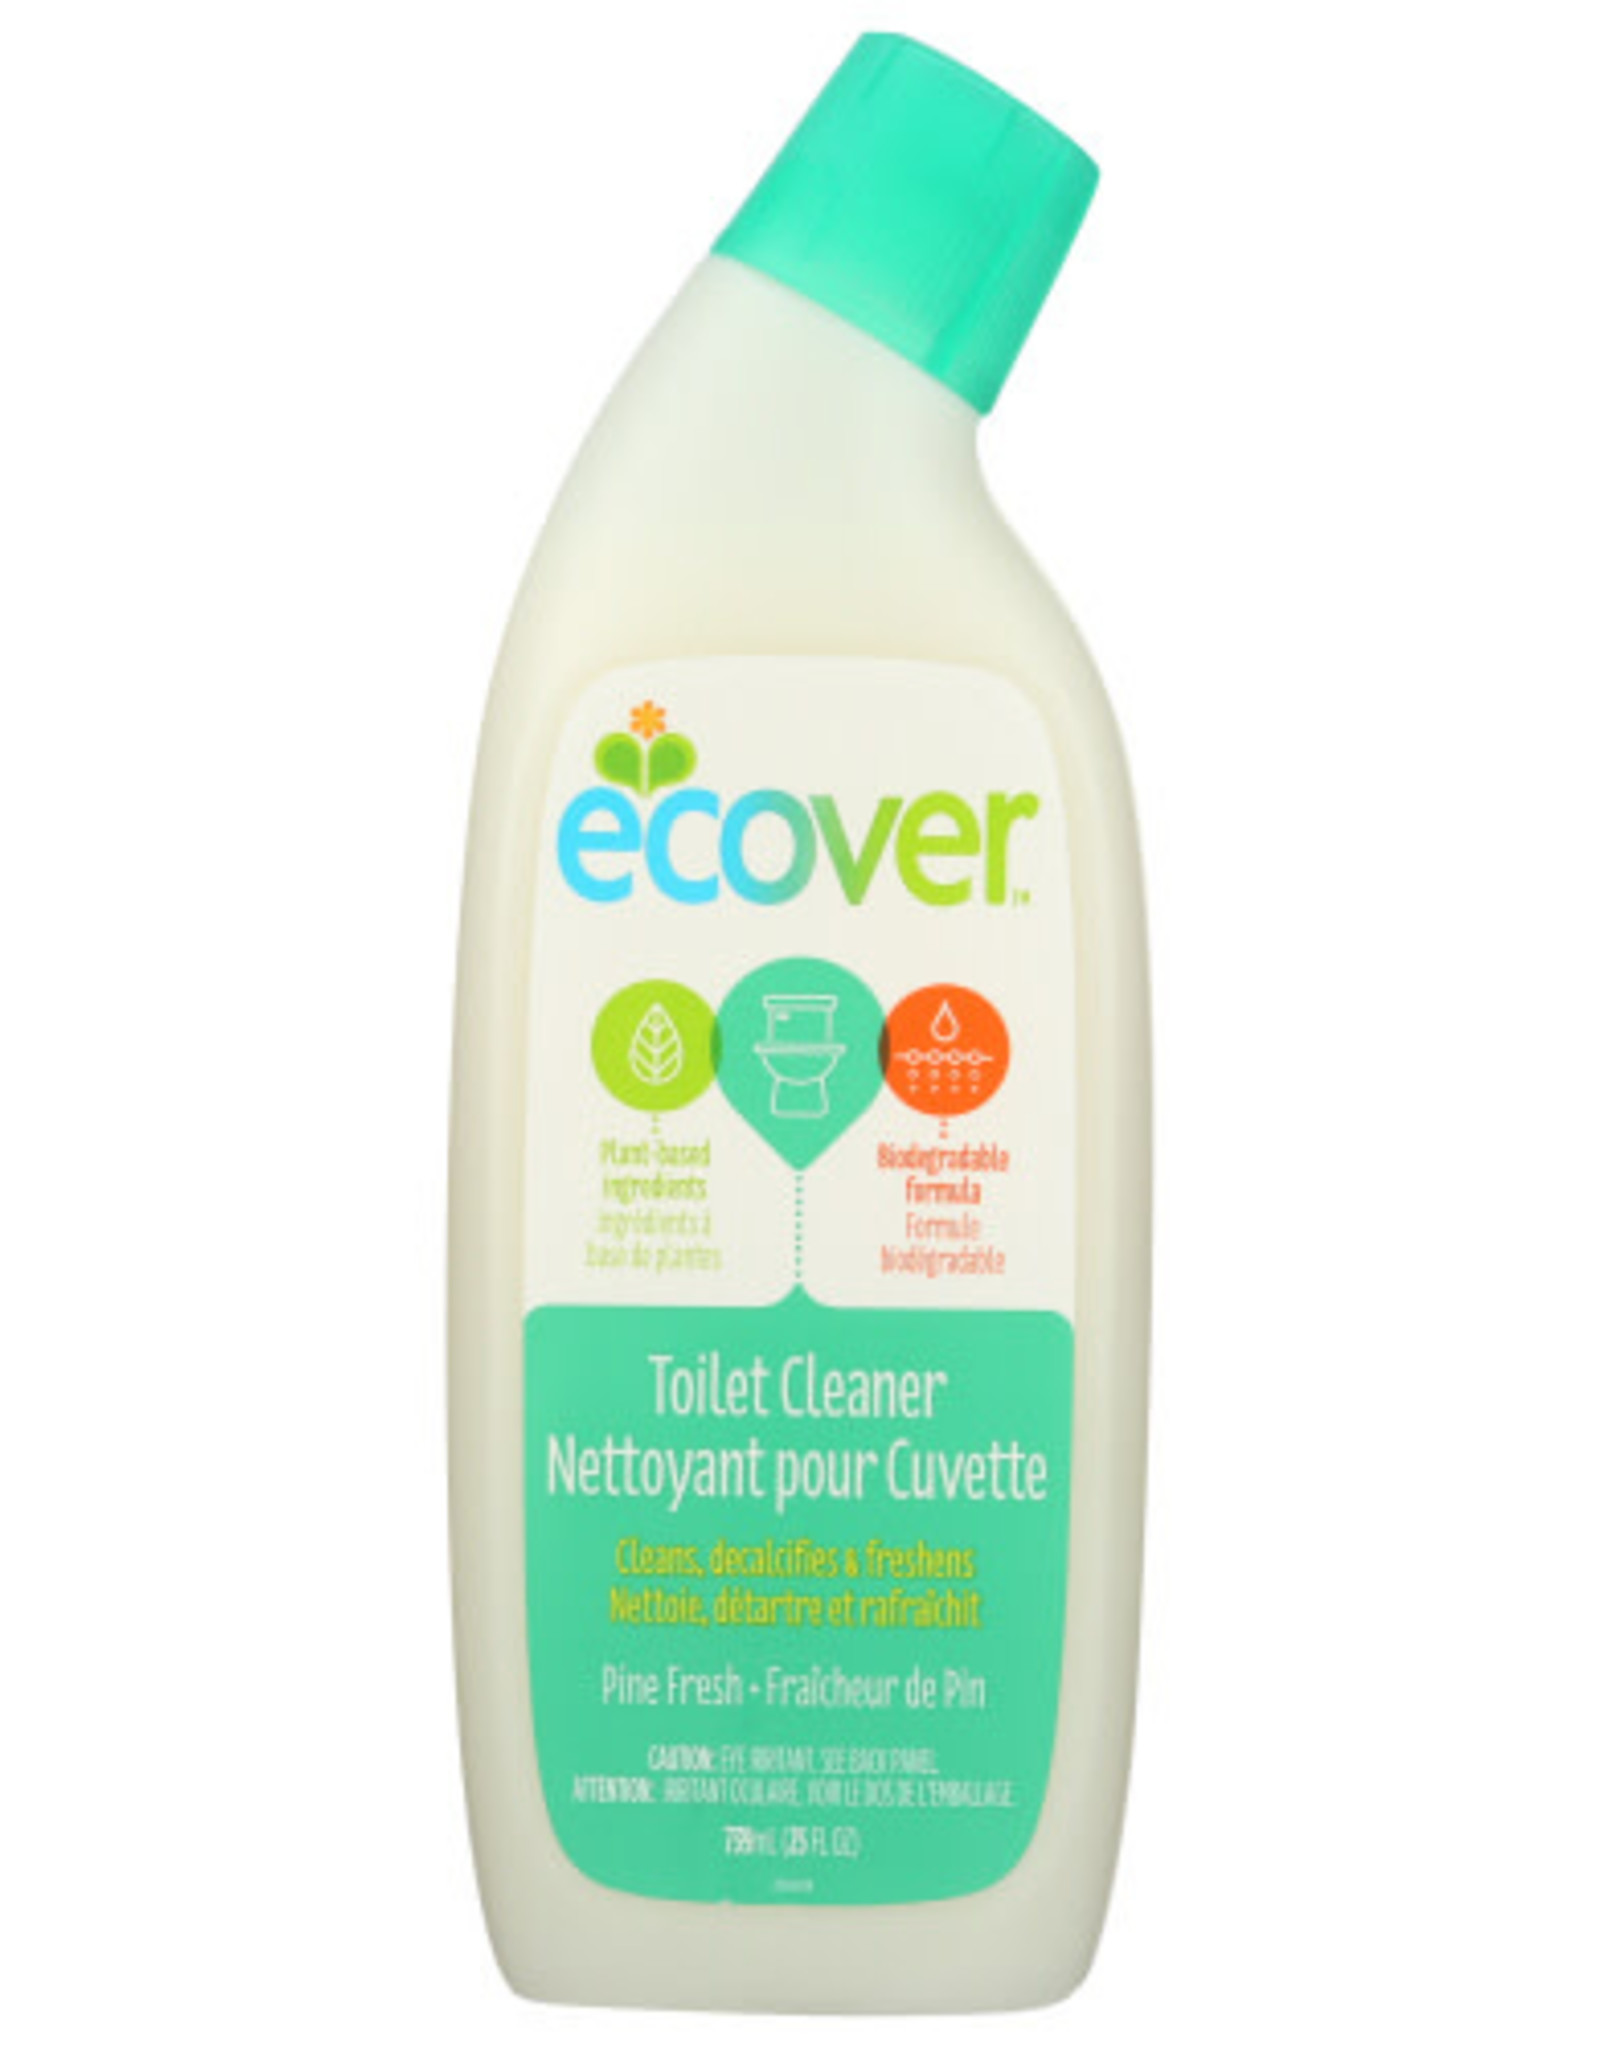 ECOVER ECOVER PINE FRESH TOILET CLEANER, 25 FL. OZ.